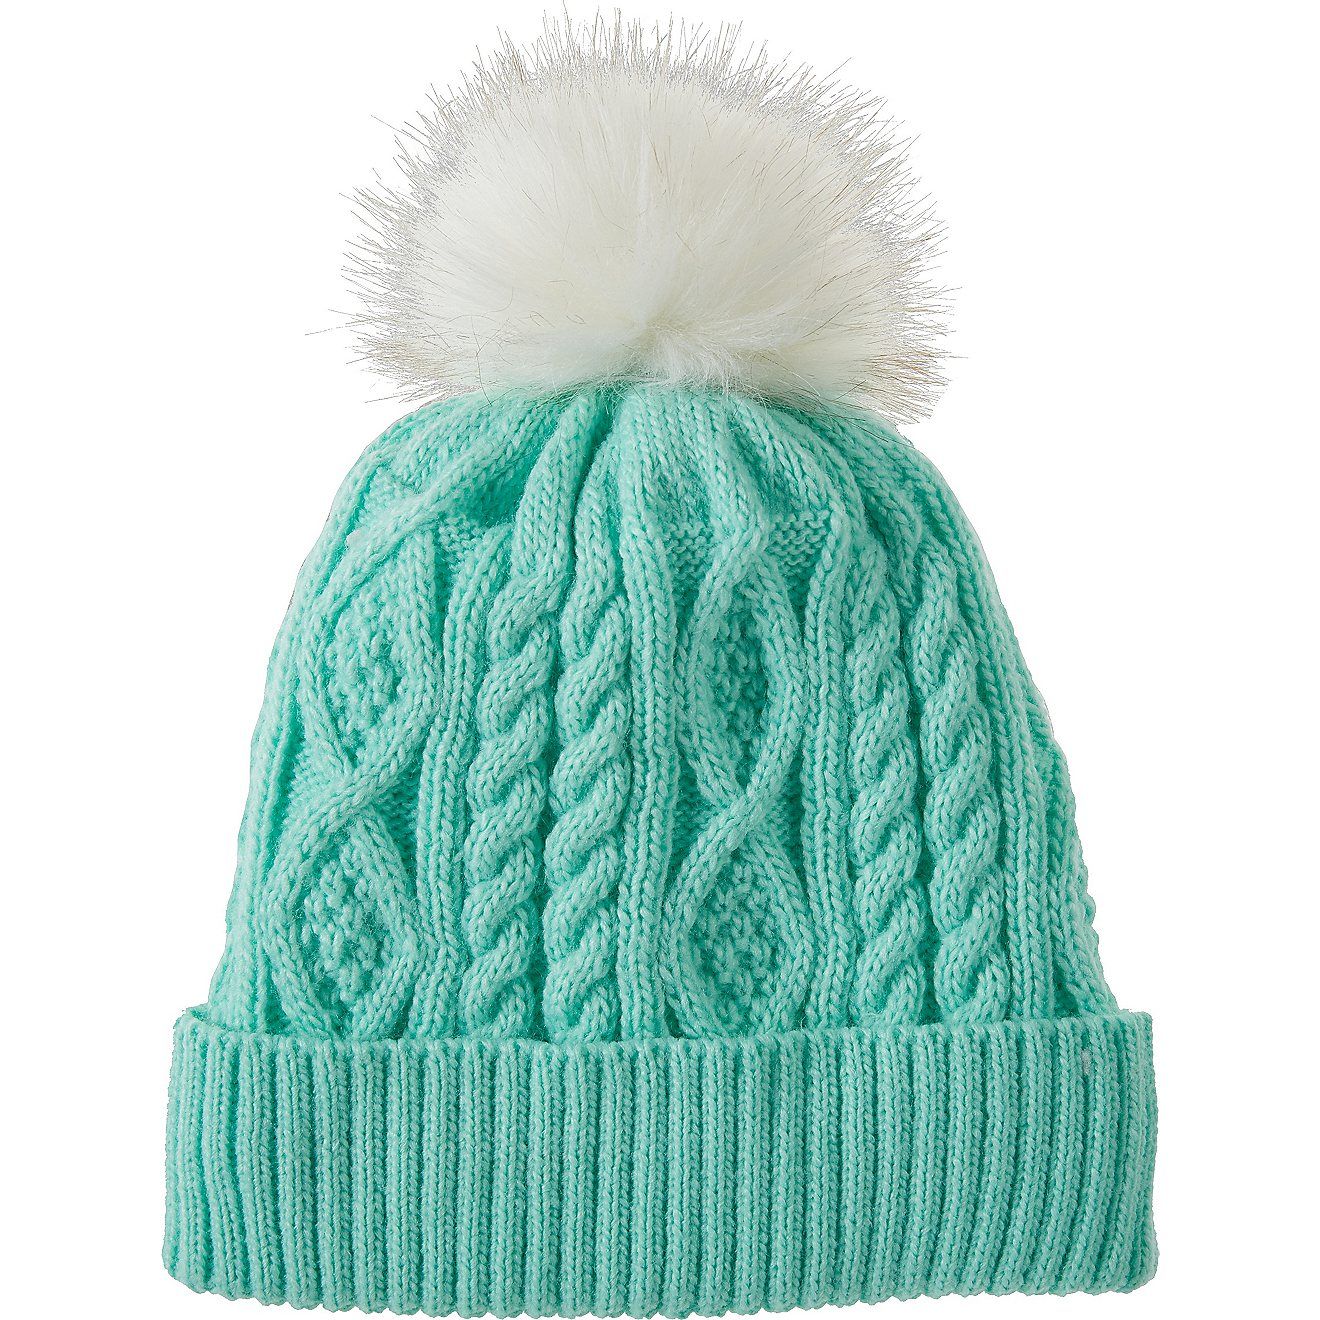 Magellan Outdoors Girls' Cable Knit Beanie | Academy | Academy Sports + Outdoors